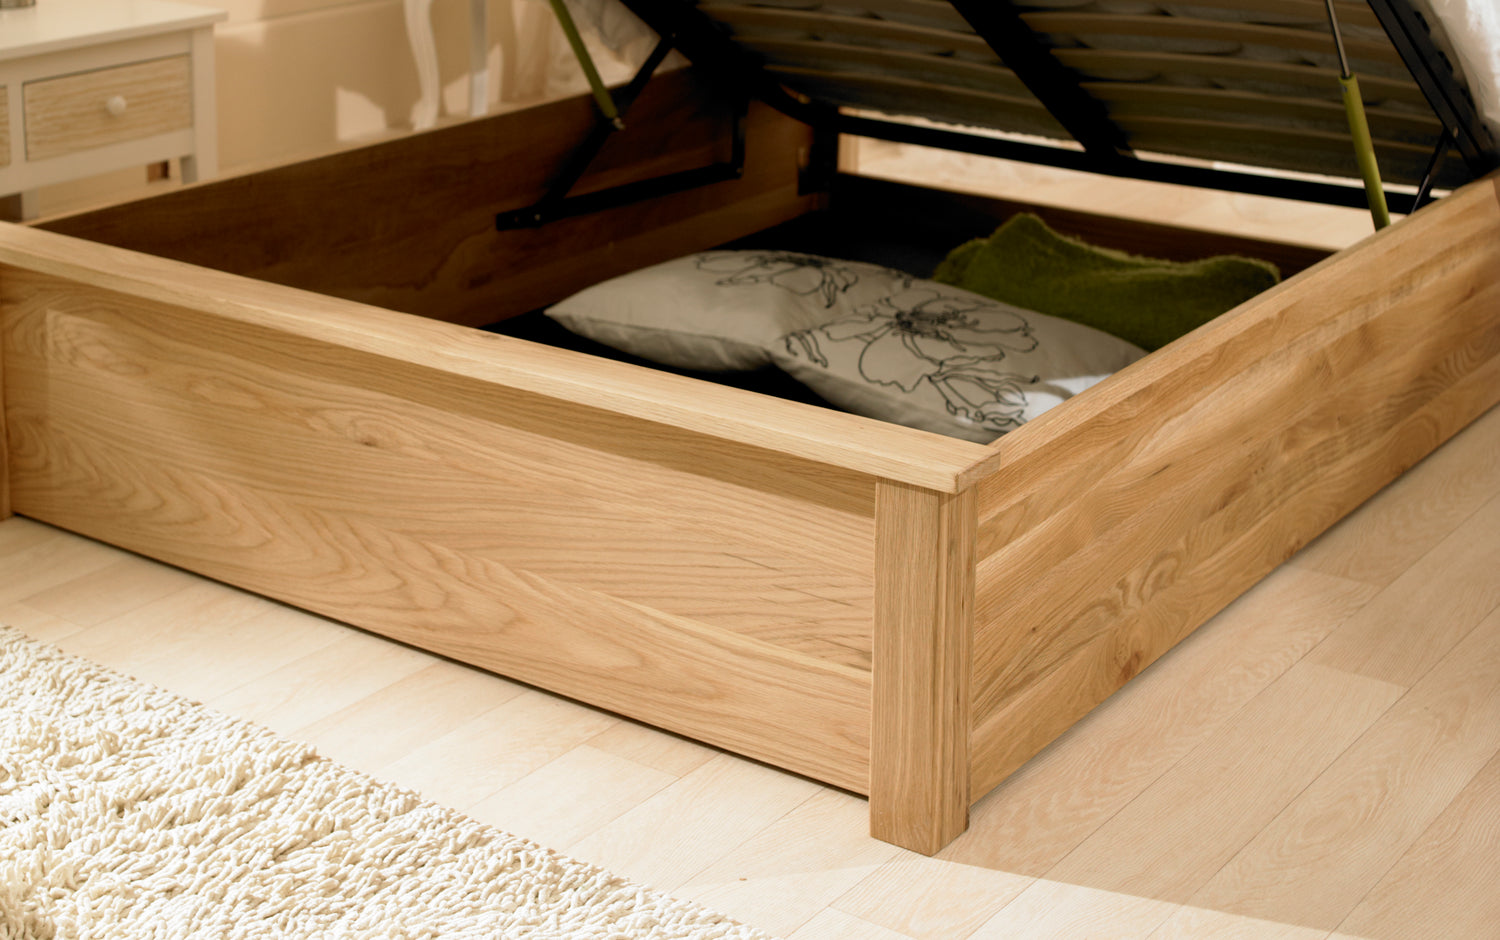 Emporia Beds Monaco Solid Oak Ottoman Bed Inside-Better Bed Company